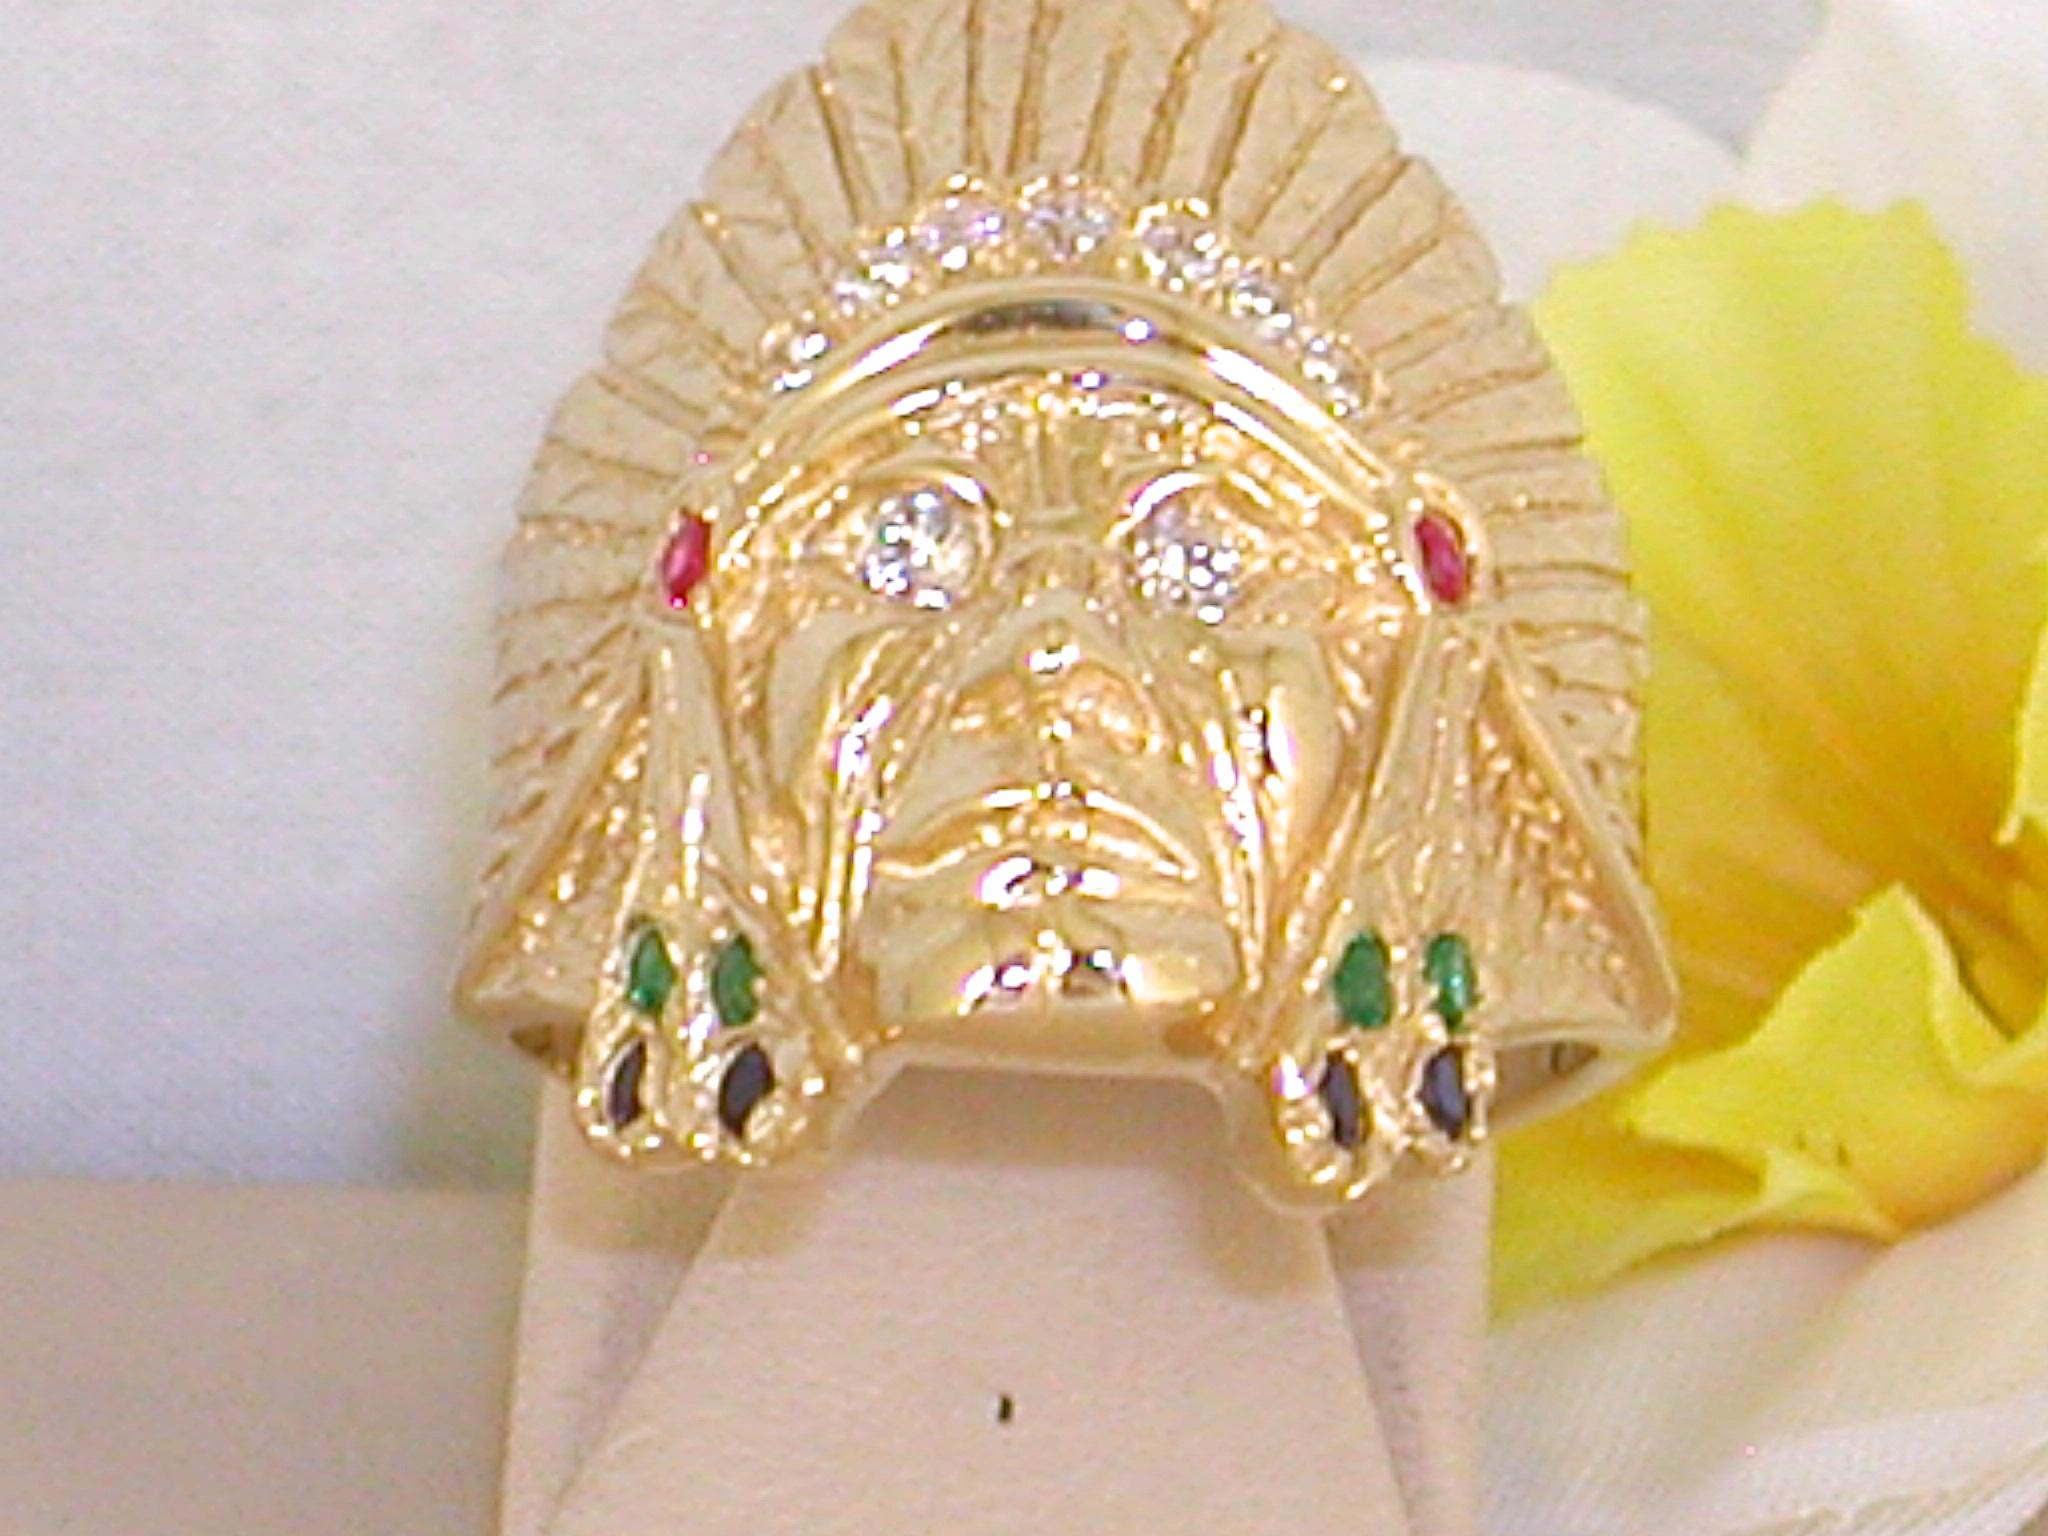 Gold: 18 Yellow gold 
Weight: 15.83 grams 
Diamonds: 0.55 ct. Colour: G  Clarity: VS2 
Emeralds: 0.20 ct.
Rubies: 0.10 ct.
Sapphires: 0.20 ct.
Ringsize:
We can resize the ring at no extra cost
Width: 2.60 cm. / 1.00 inch
Condition: Brand New 
All